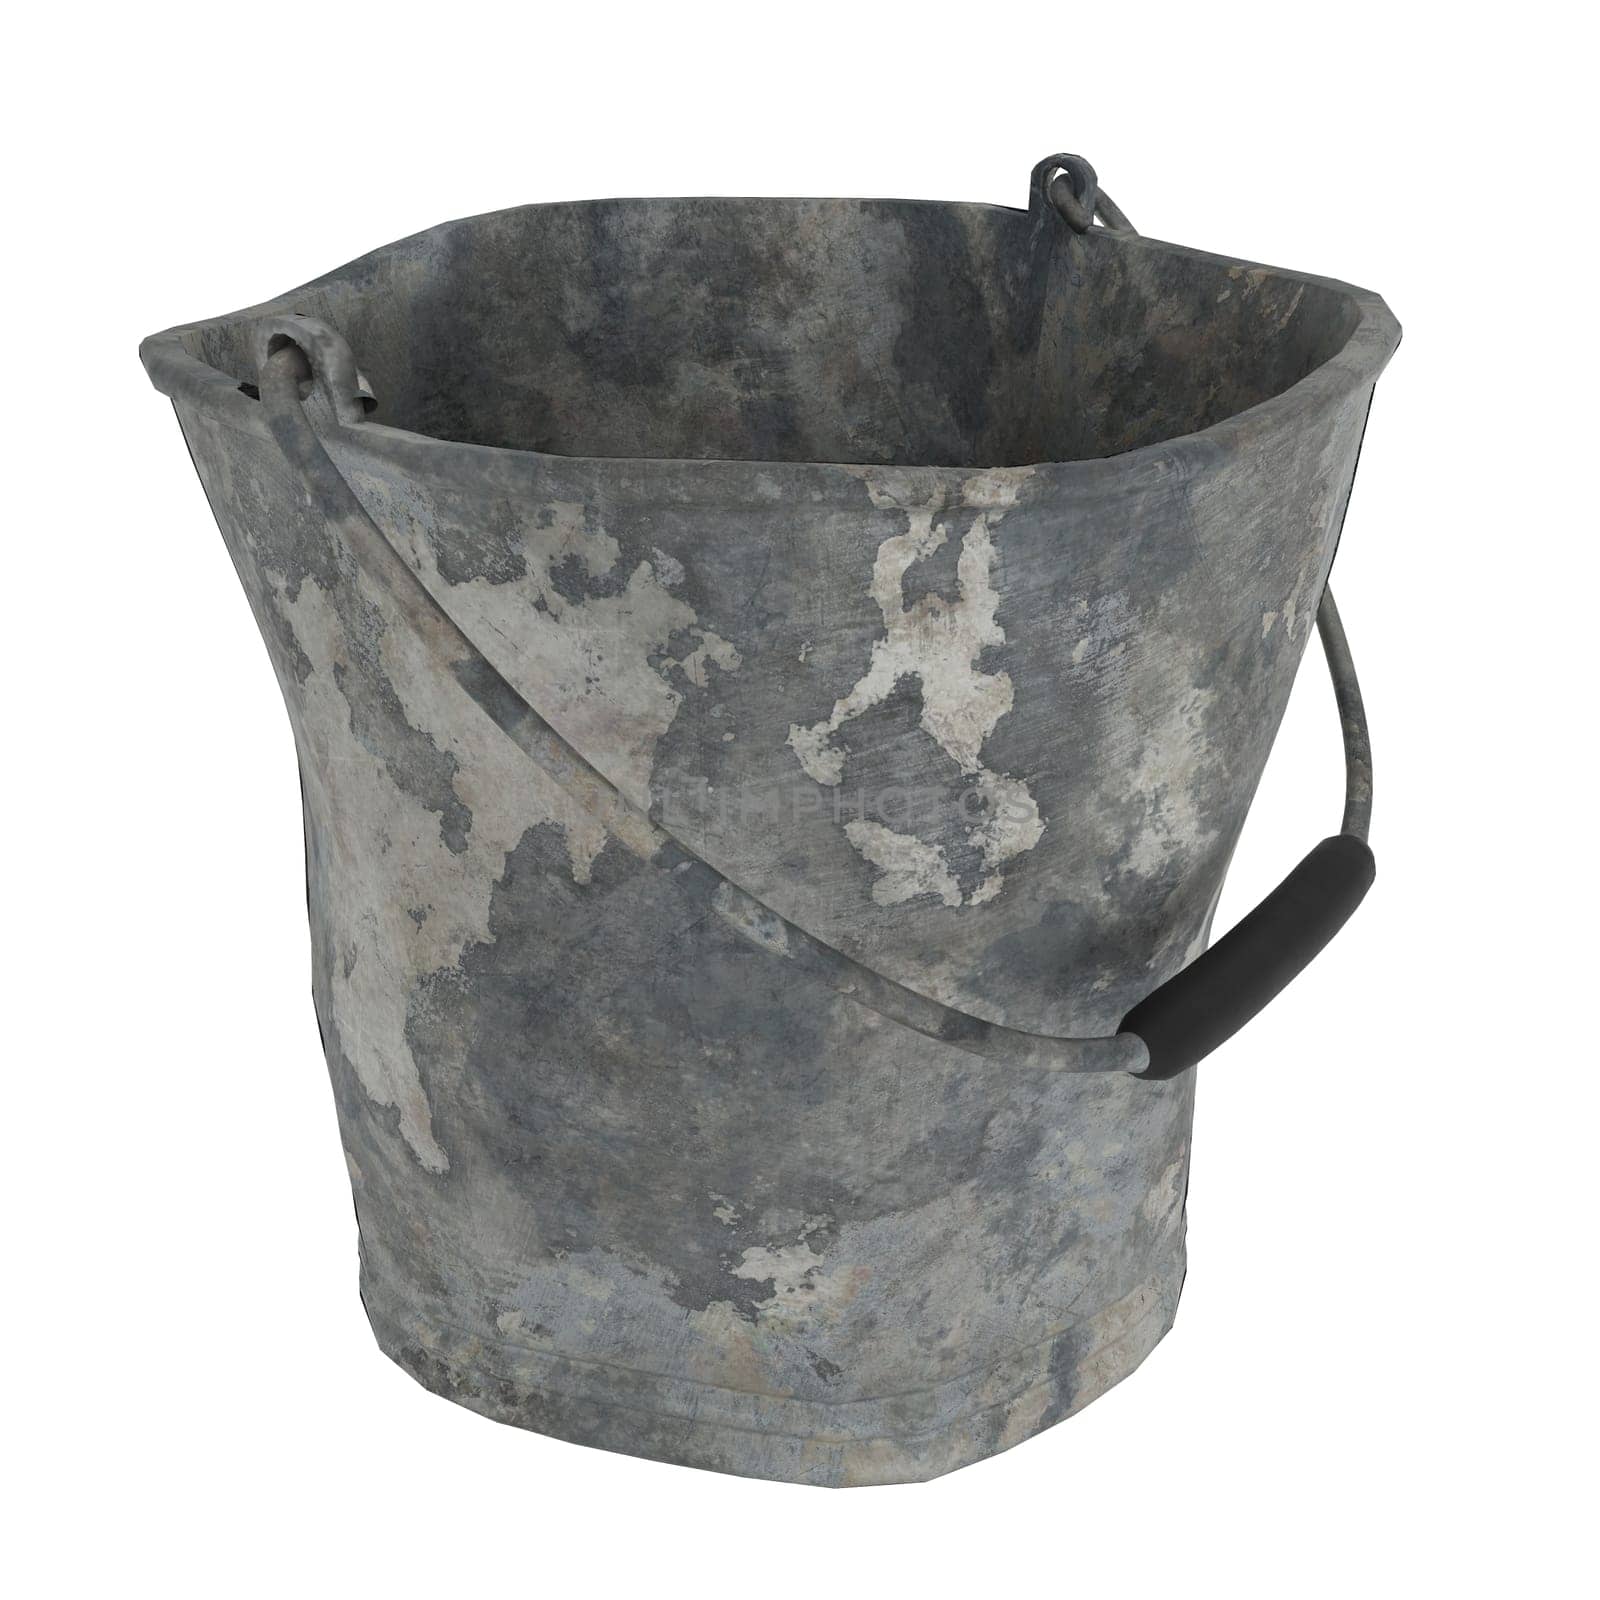 Rusted Paint Bucket isolated on white background. High quality 3d illustration